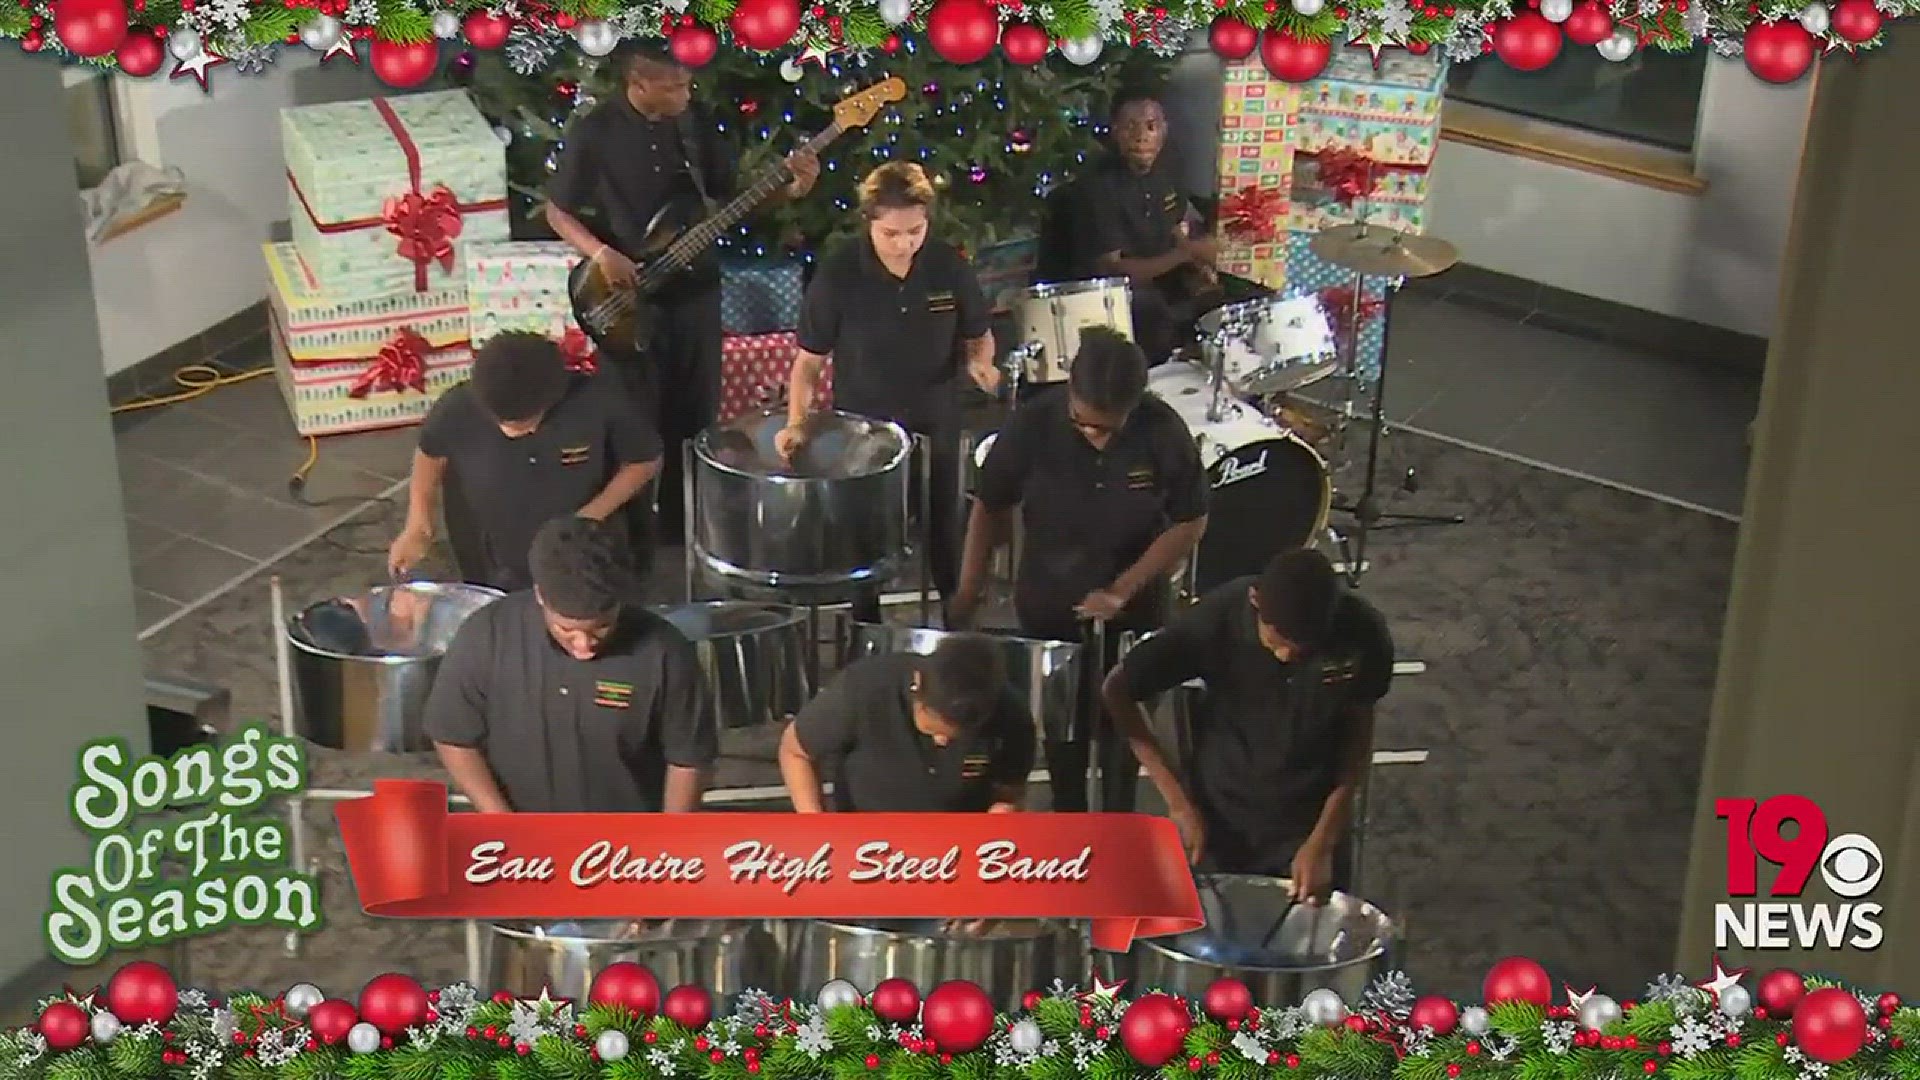 The Eau Claire High Steel Band performs as a part of News19's "Songs of the Season."